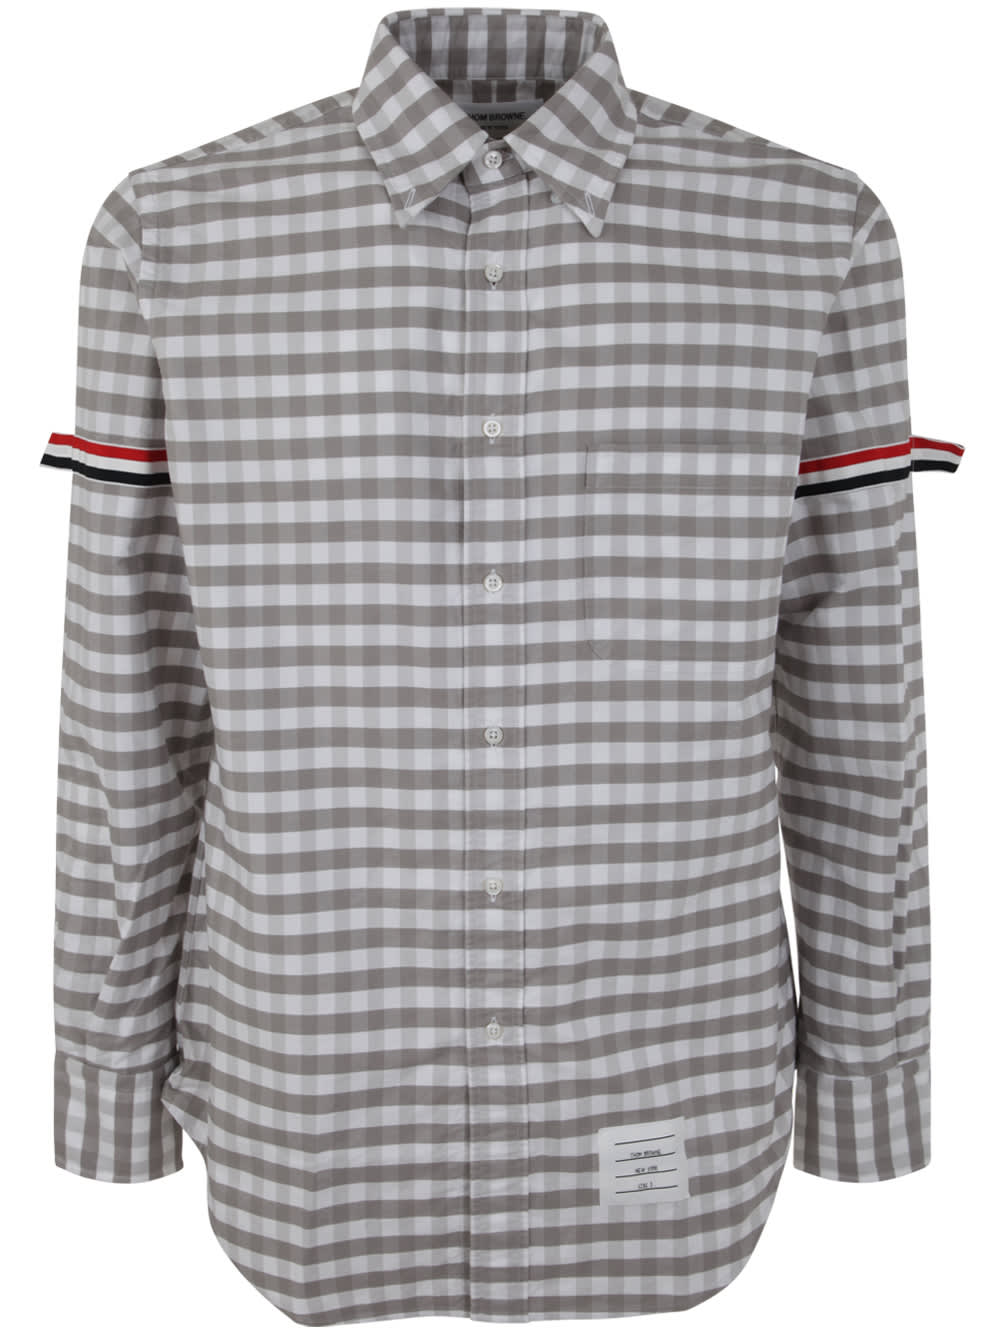 THOM BROWNE CLASSIC FIT SHIRT WITH ARMBAND IN GINGHAM CHECK OXFORD